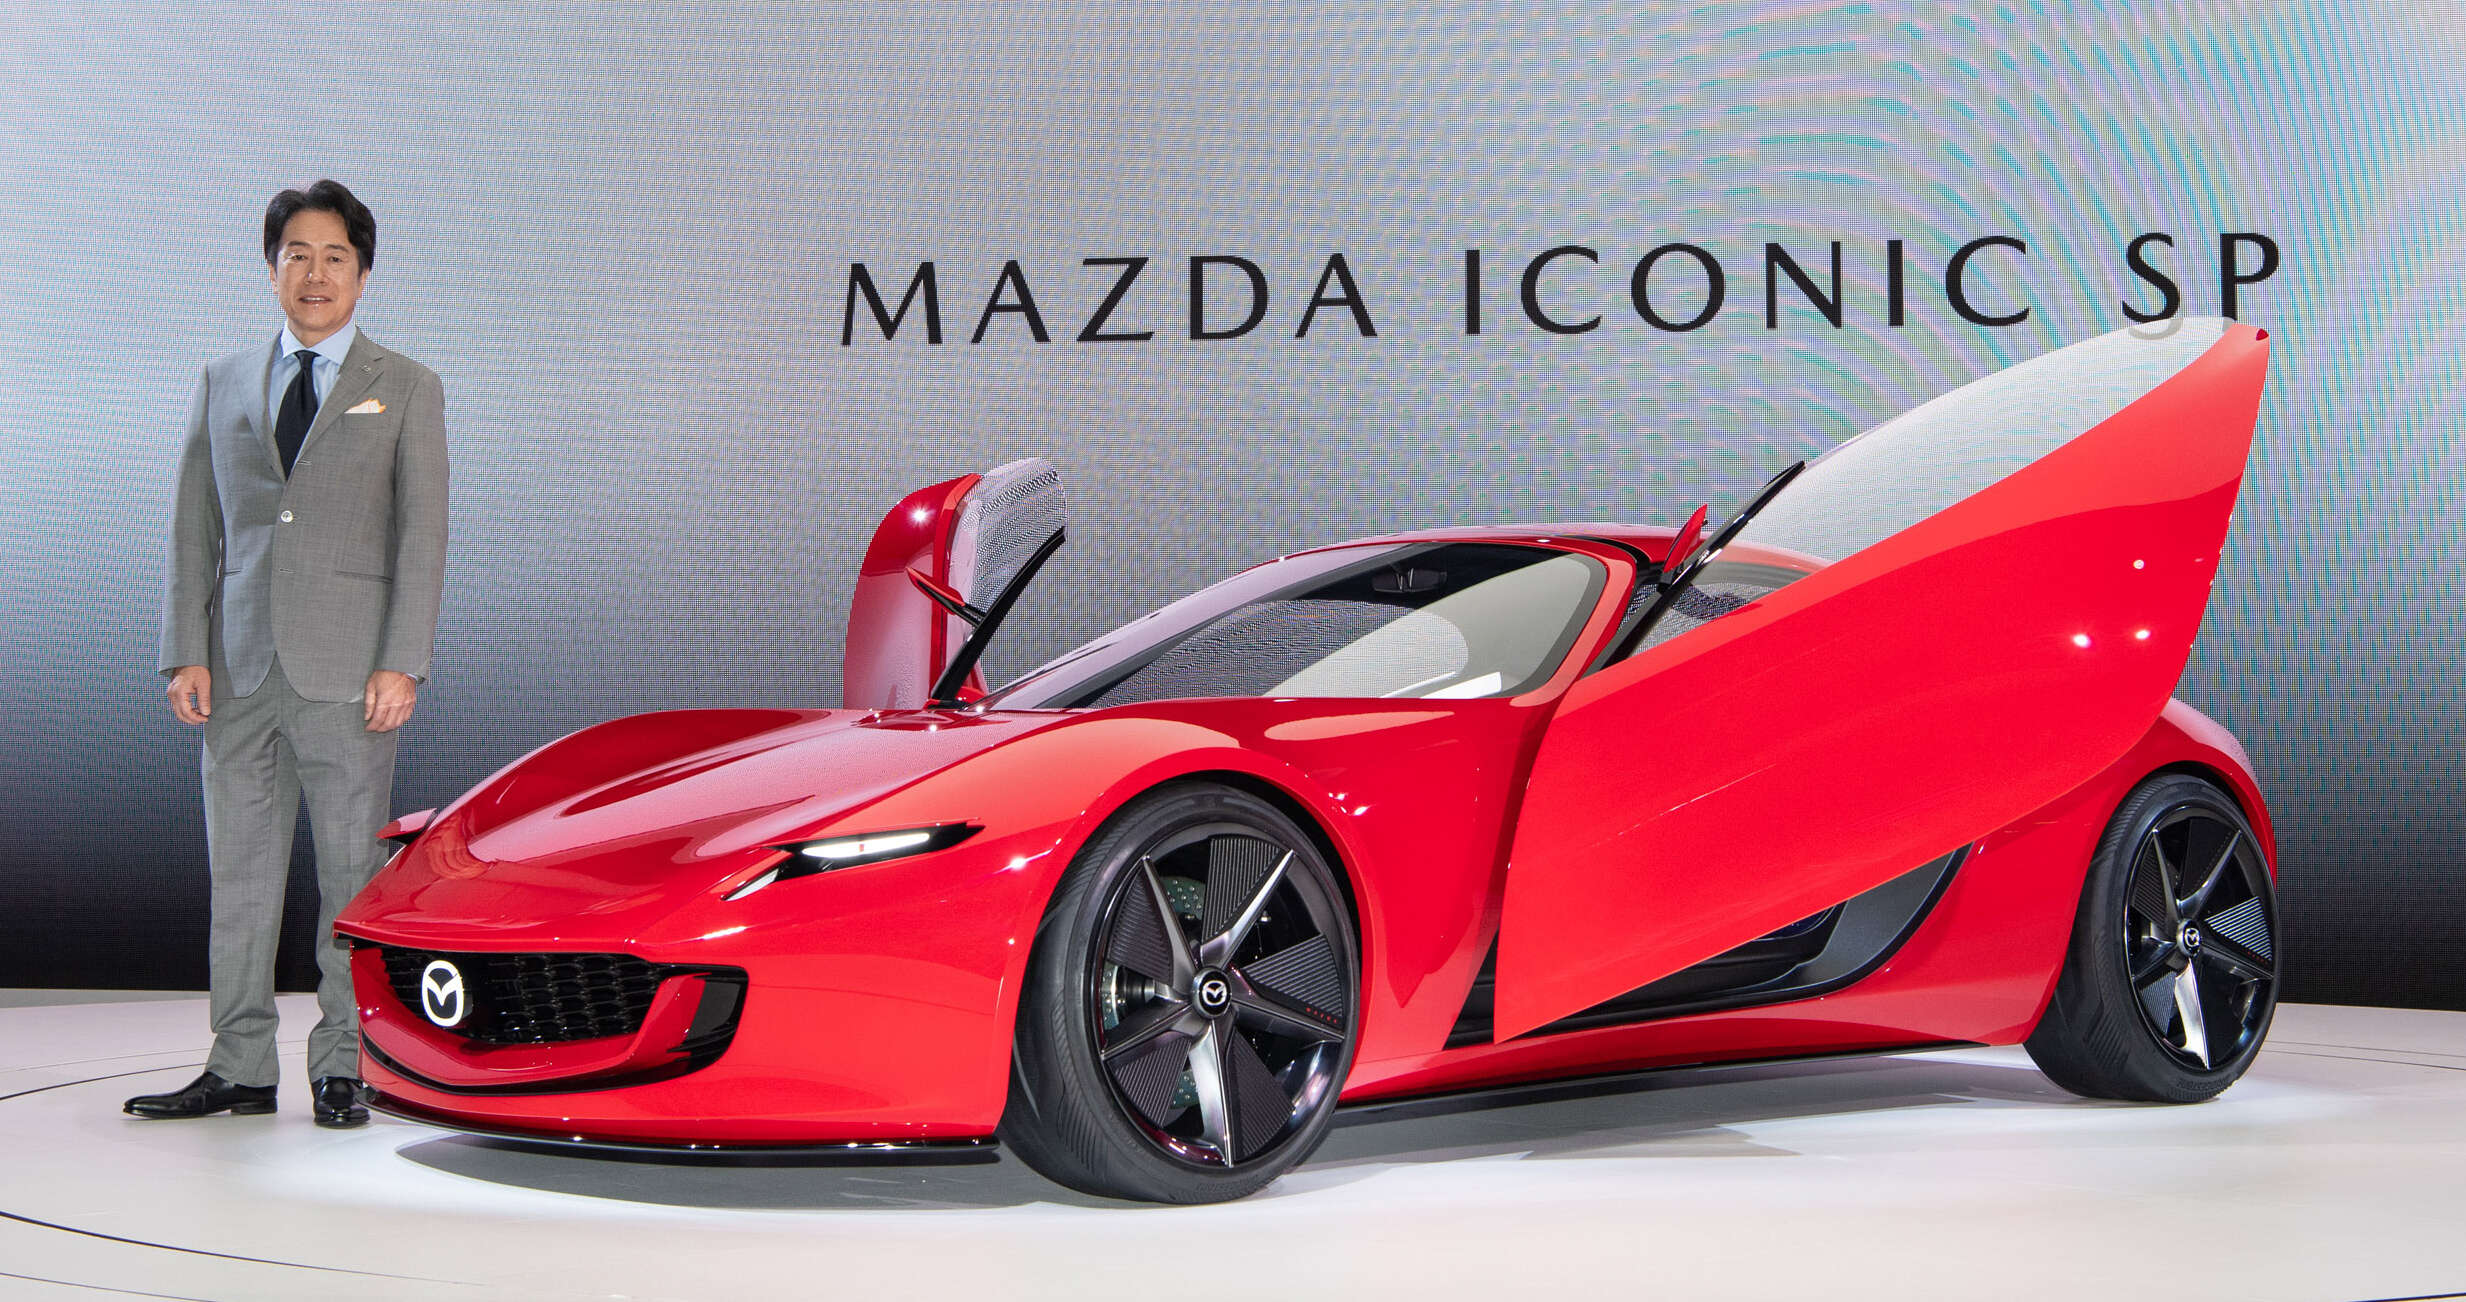 Mazda's gorgeous Iconic SP rotary-EV sports concept transcends time